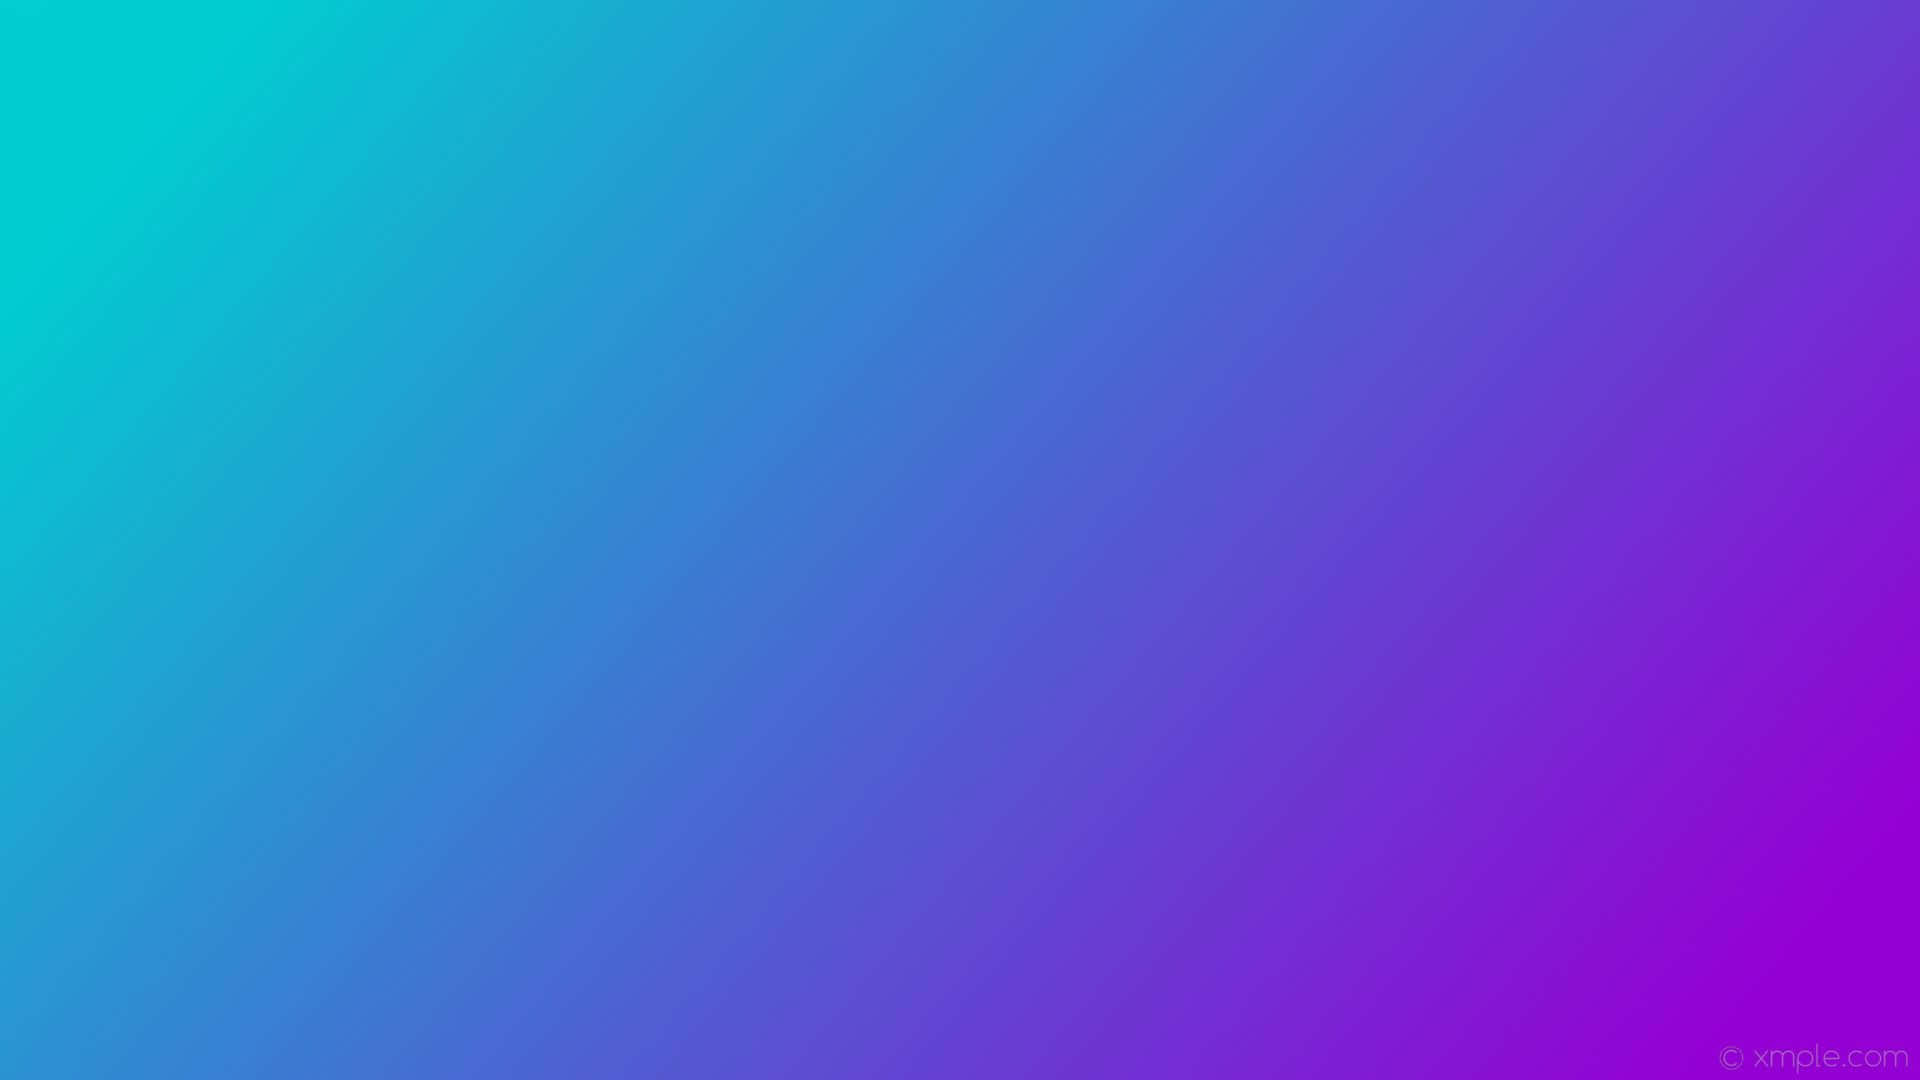 Abstract design featuring a combination of purple and blue colors